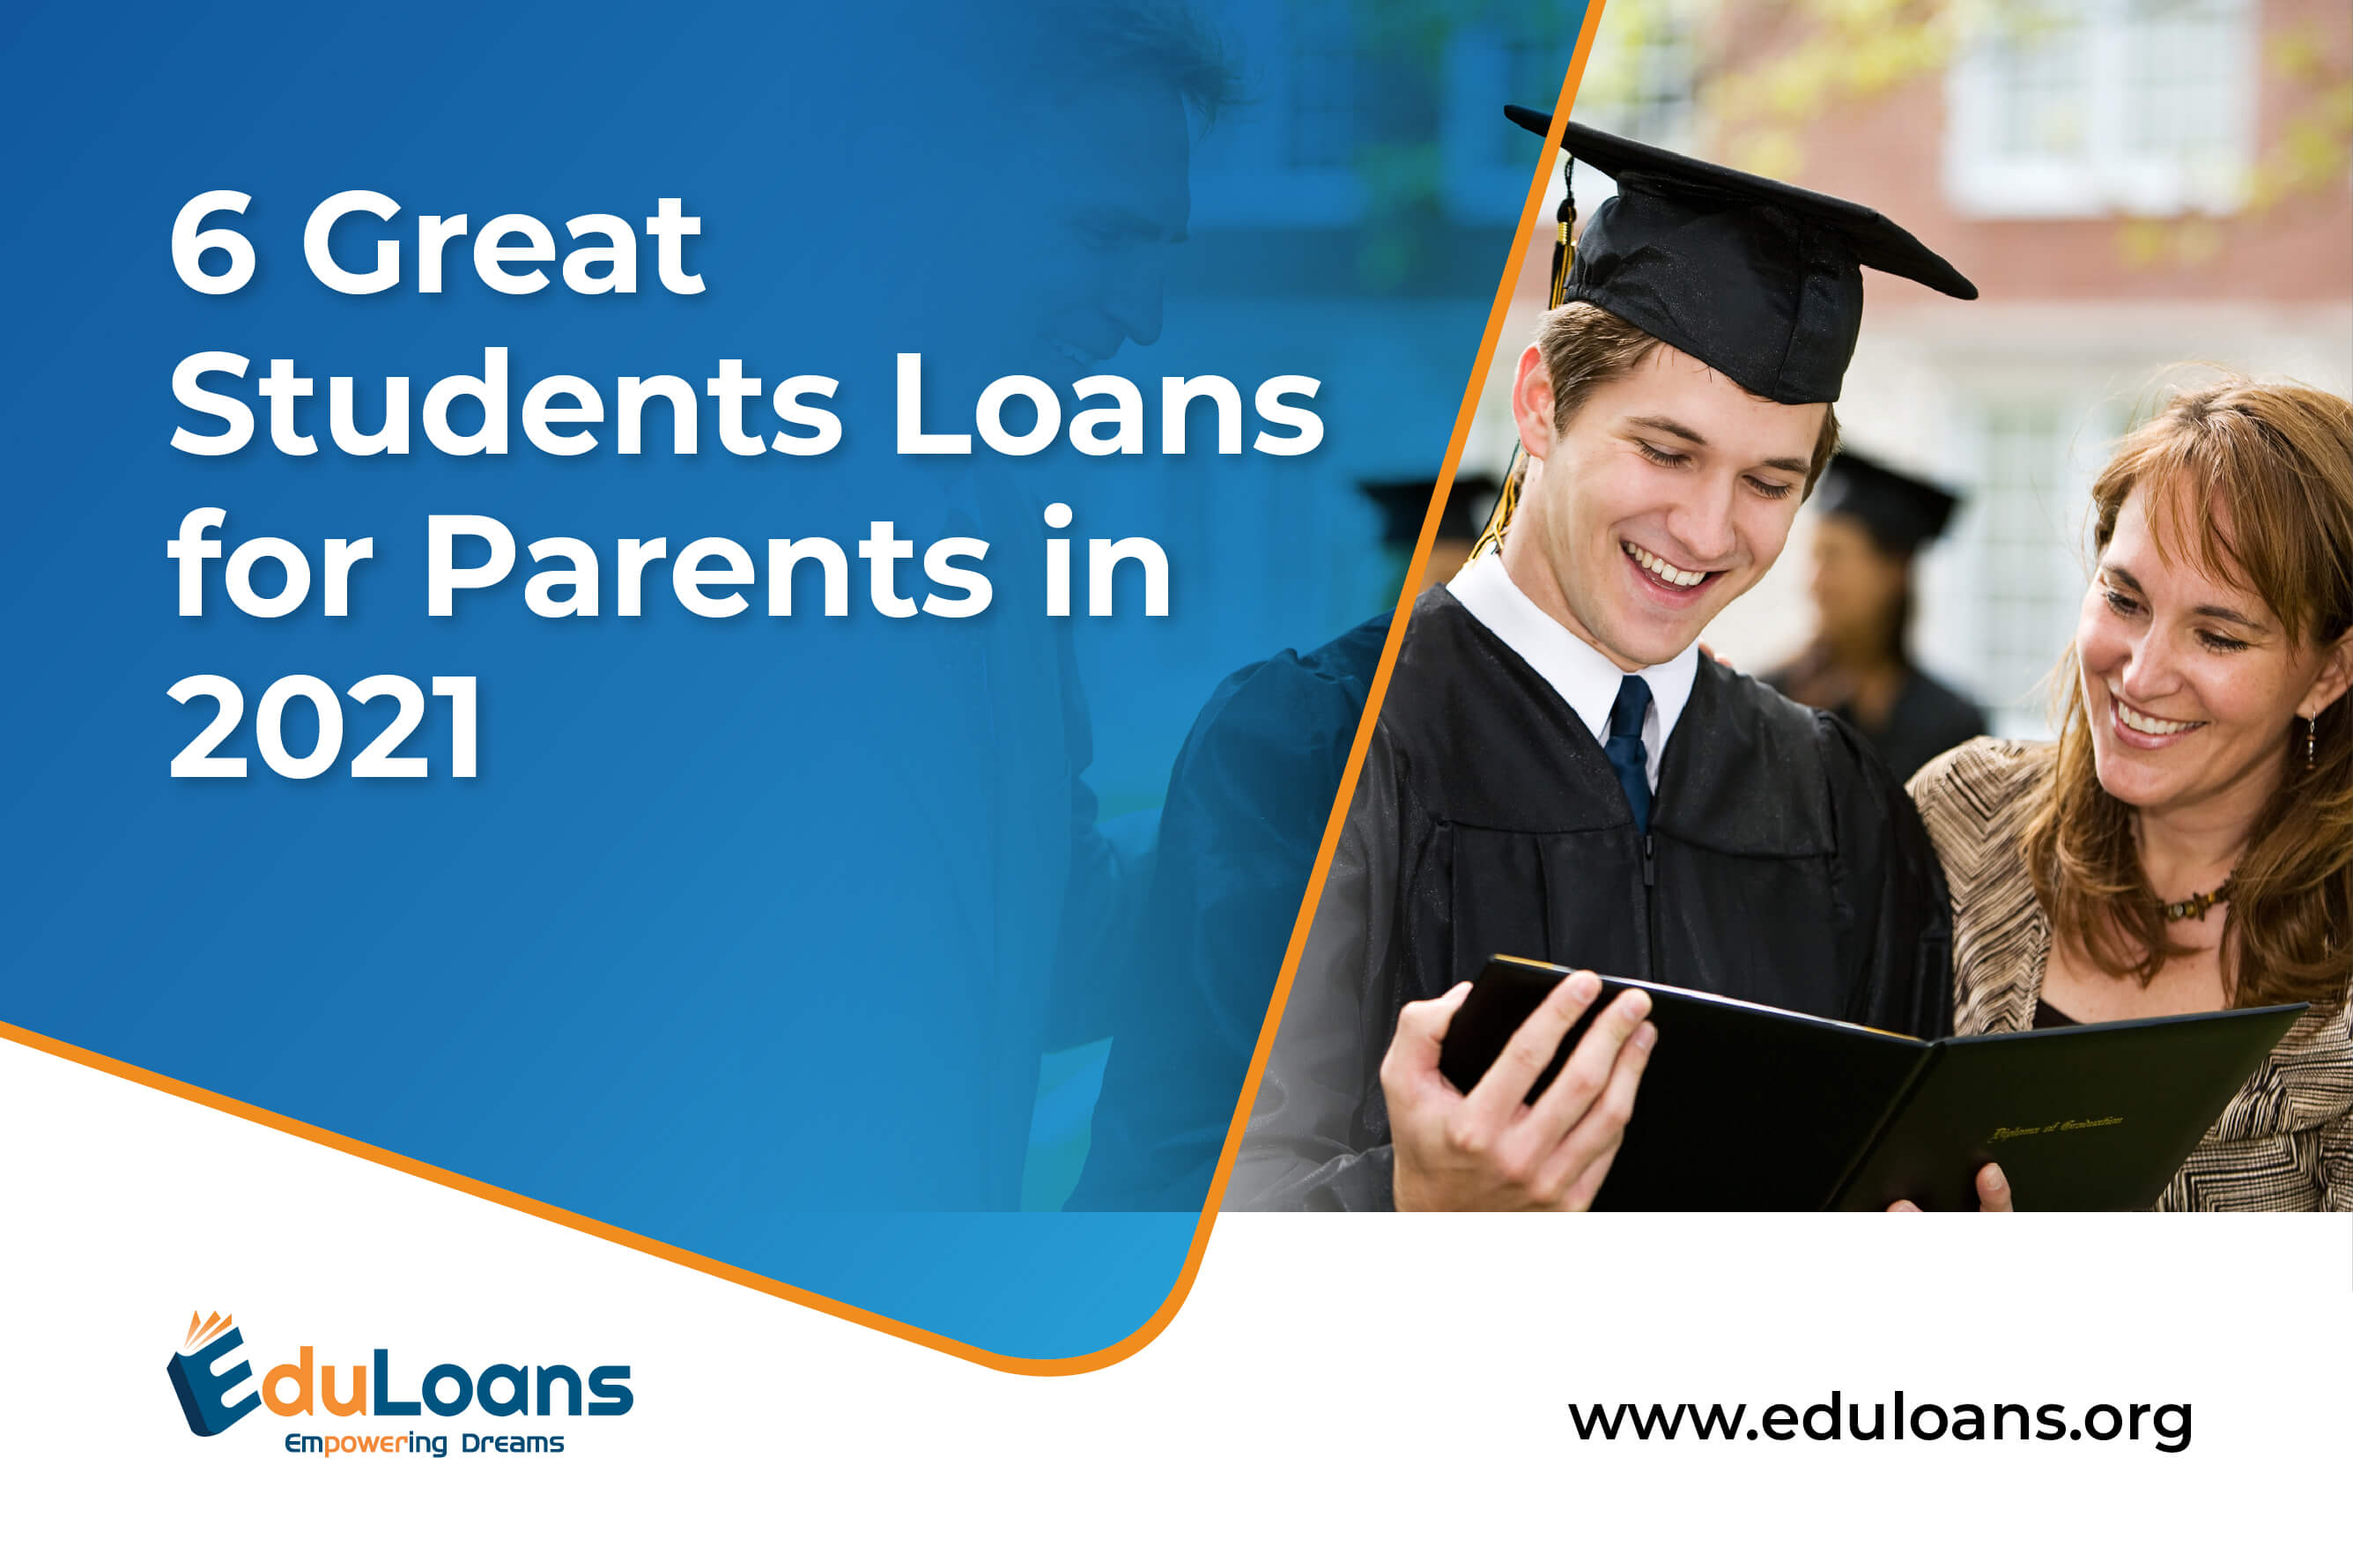 6 Great Student Loans for Parents in 2021